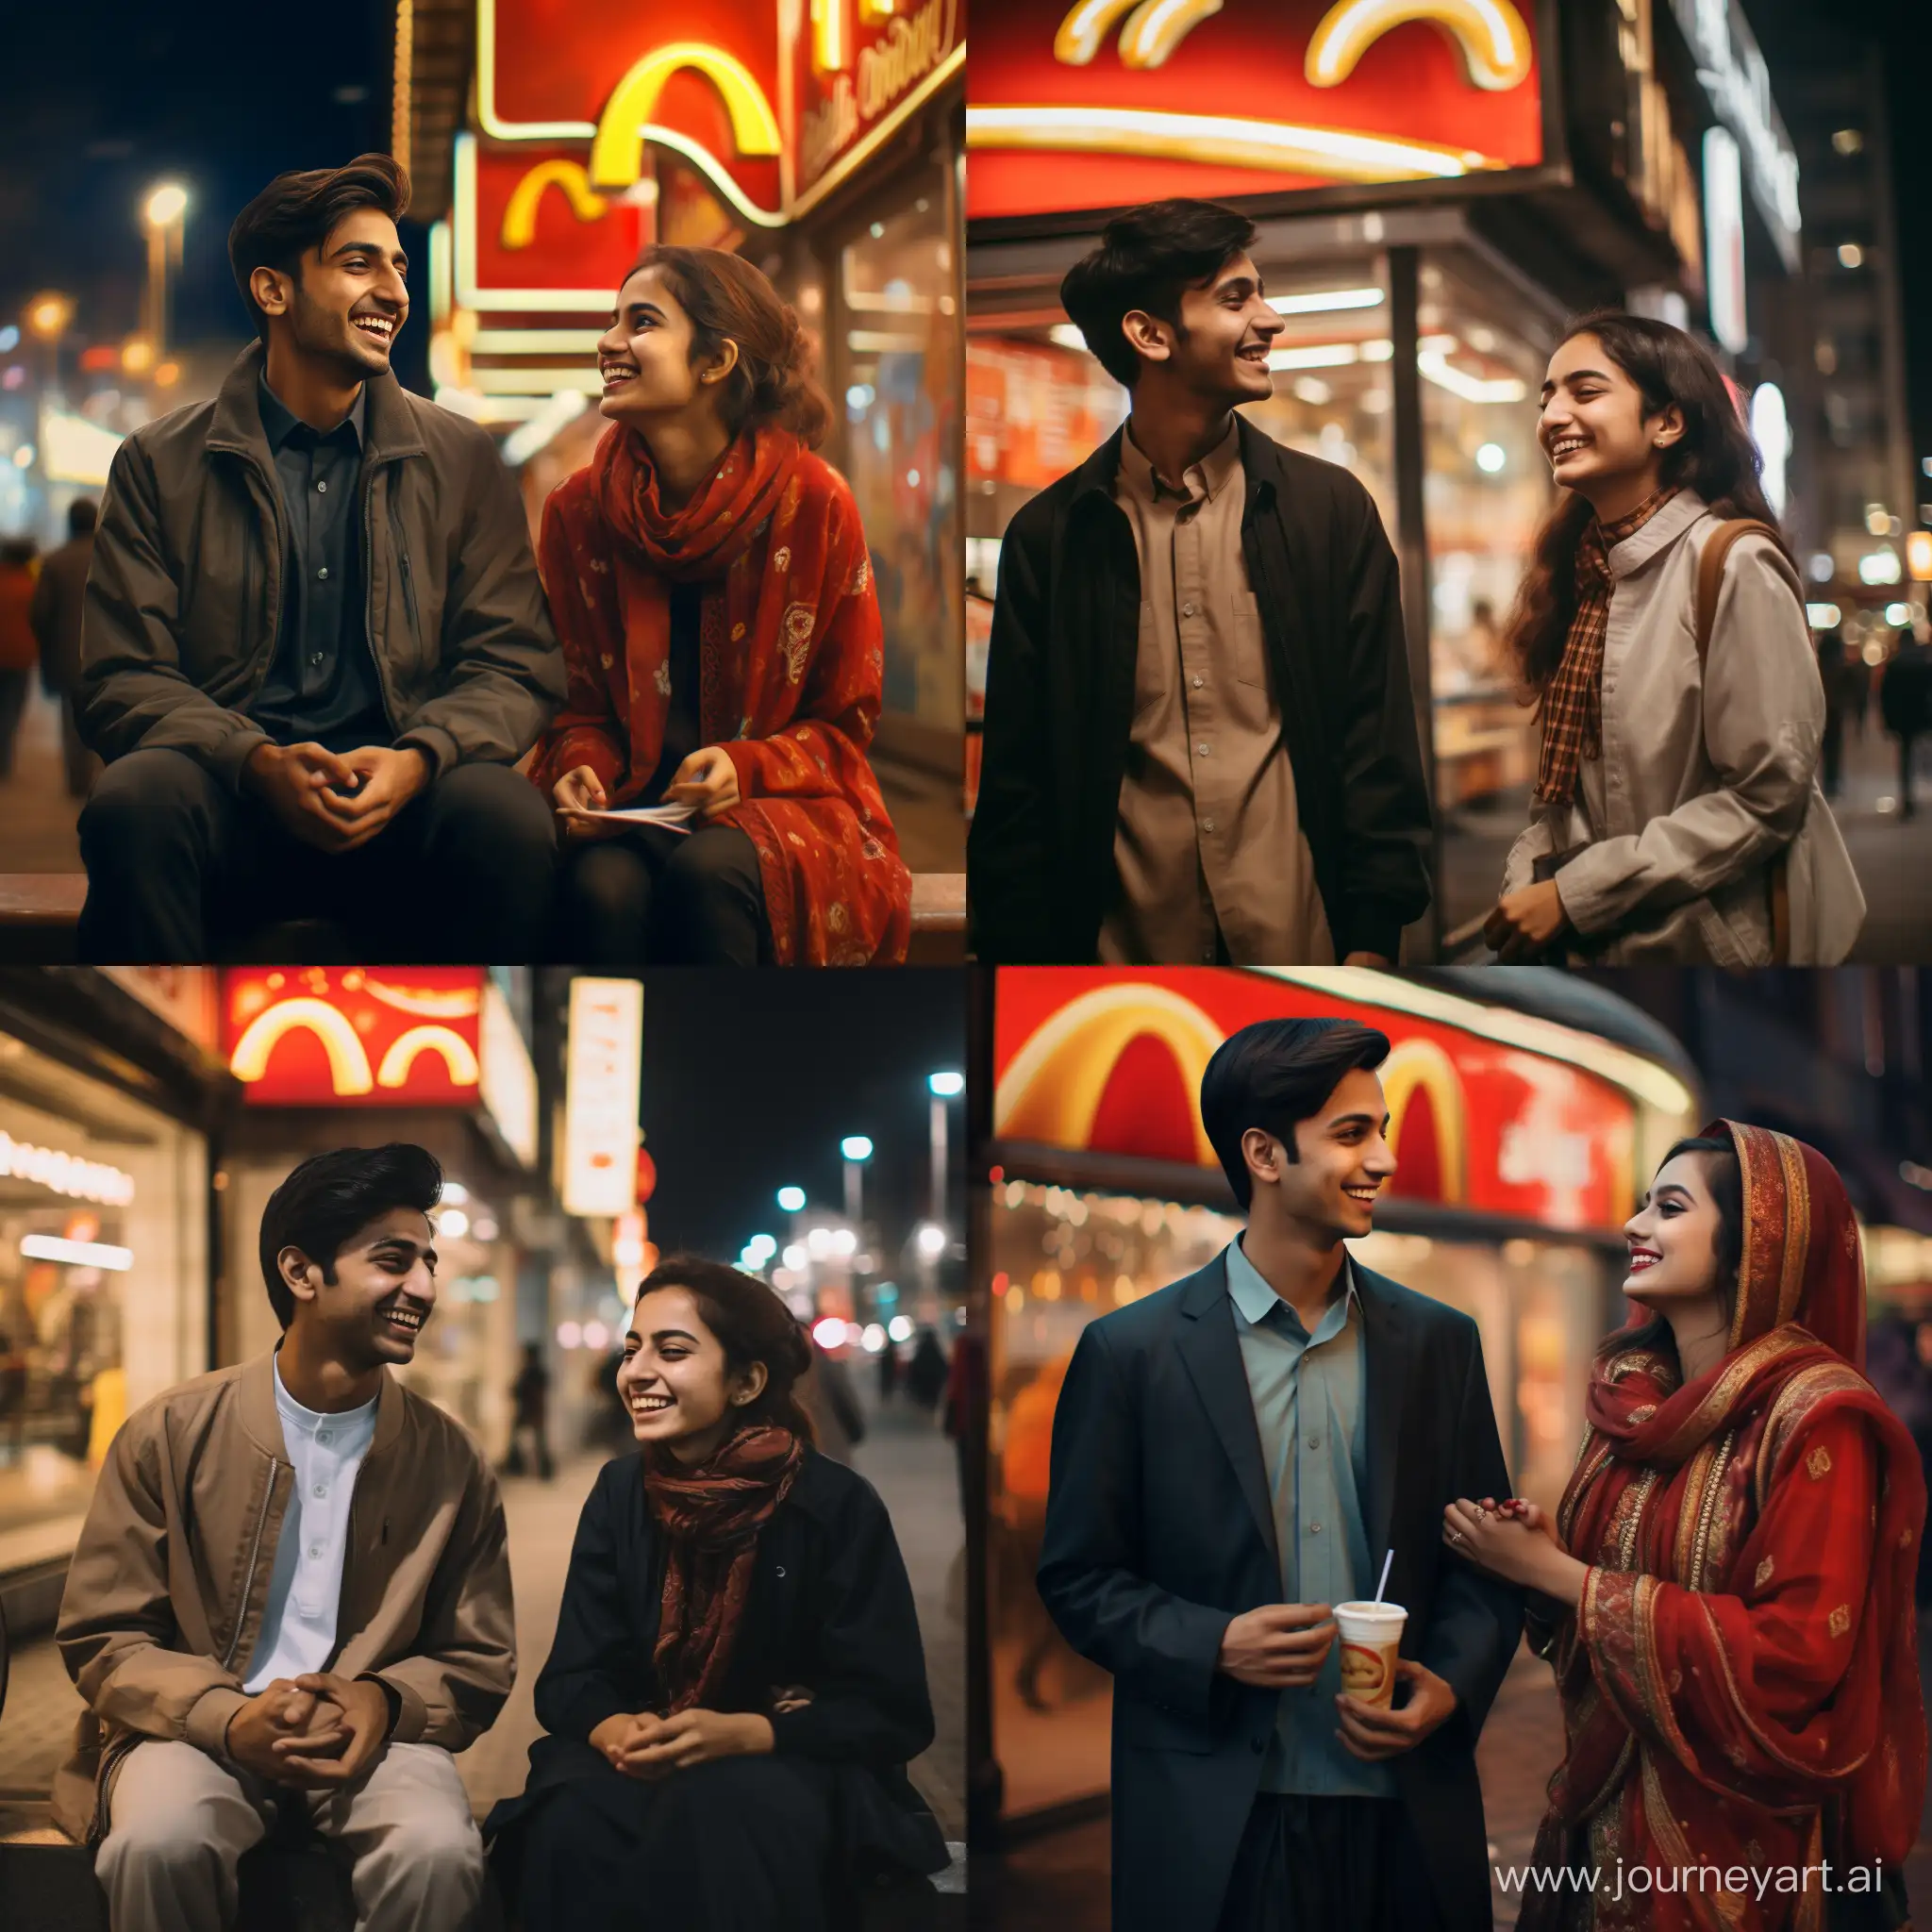 An 18-year-old Pakistani boy, dressed in modern attire, sharing little smile with a 18 years old girl outside a brightly lit McDonald's, their expressions exuding joy and excitement against a backdrop of a bustling city street.